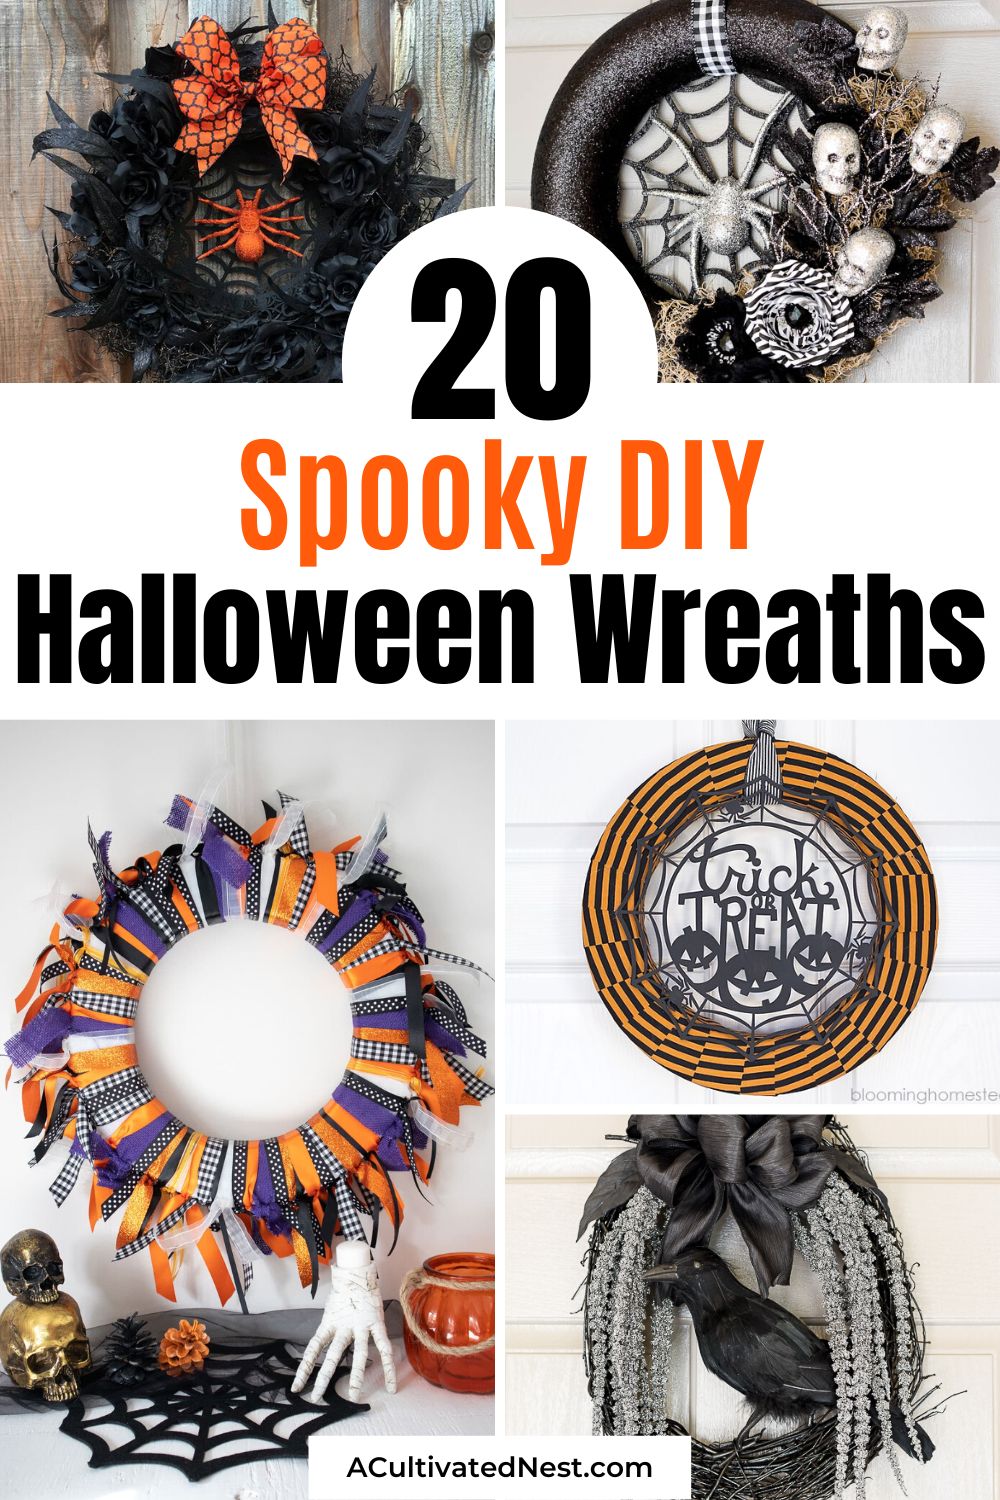 20 Spooky DIY Halloween Wreaths- Decorate your front porch for Halloween on a budget with these Halloween wreaths! They're inexpensive, easy, and quick to make! | #Halloween #HalloweenCraft #crafts #HalloweenWreaths #ACultivatedNest